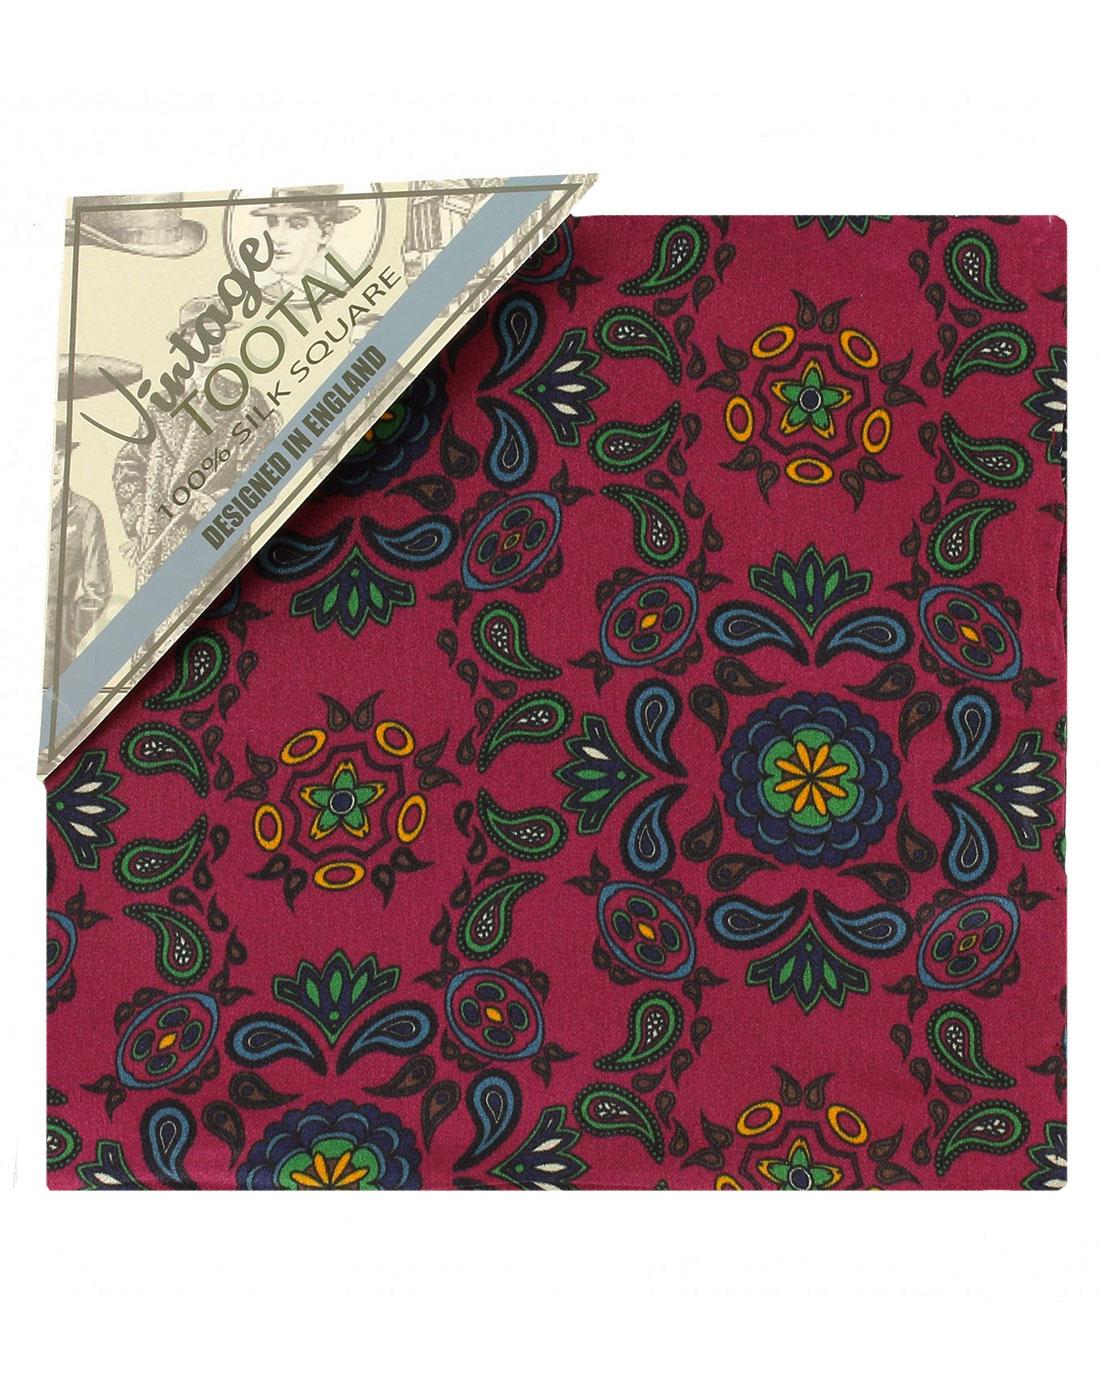 TOOTAL 60s Mod Paisley Silk Pocket Square Oxblood